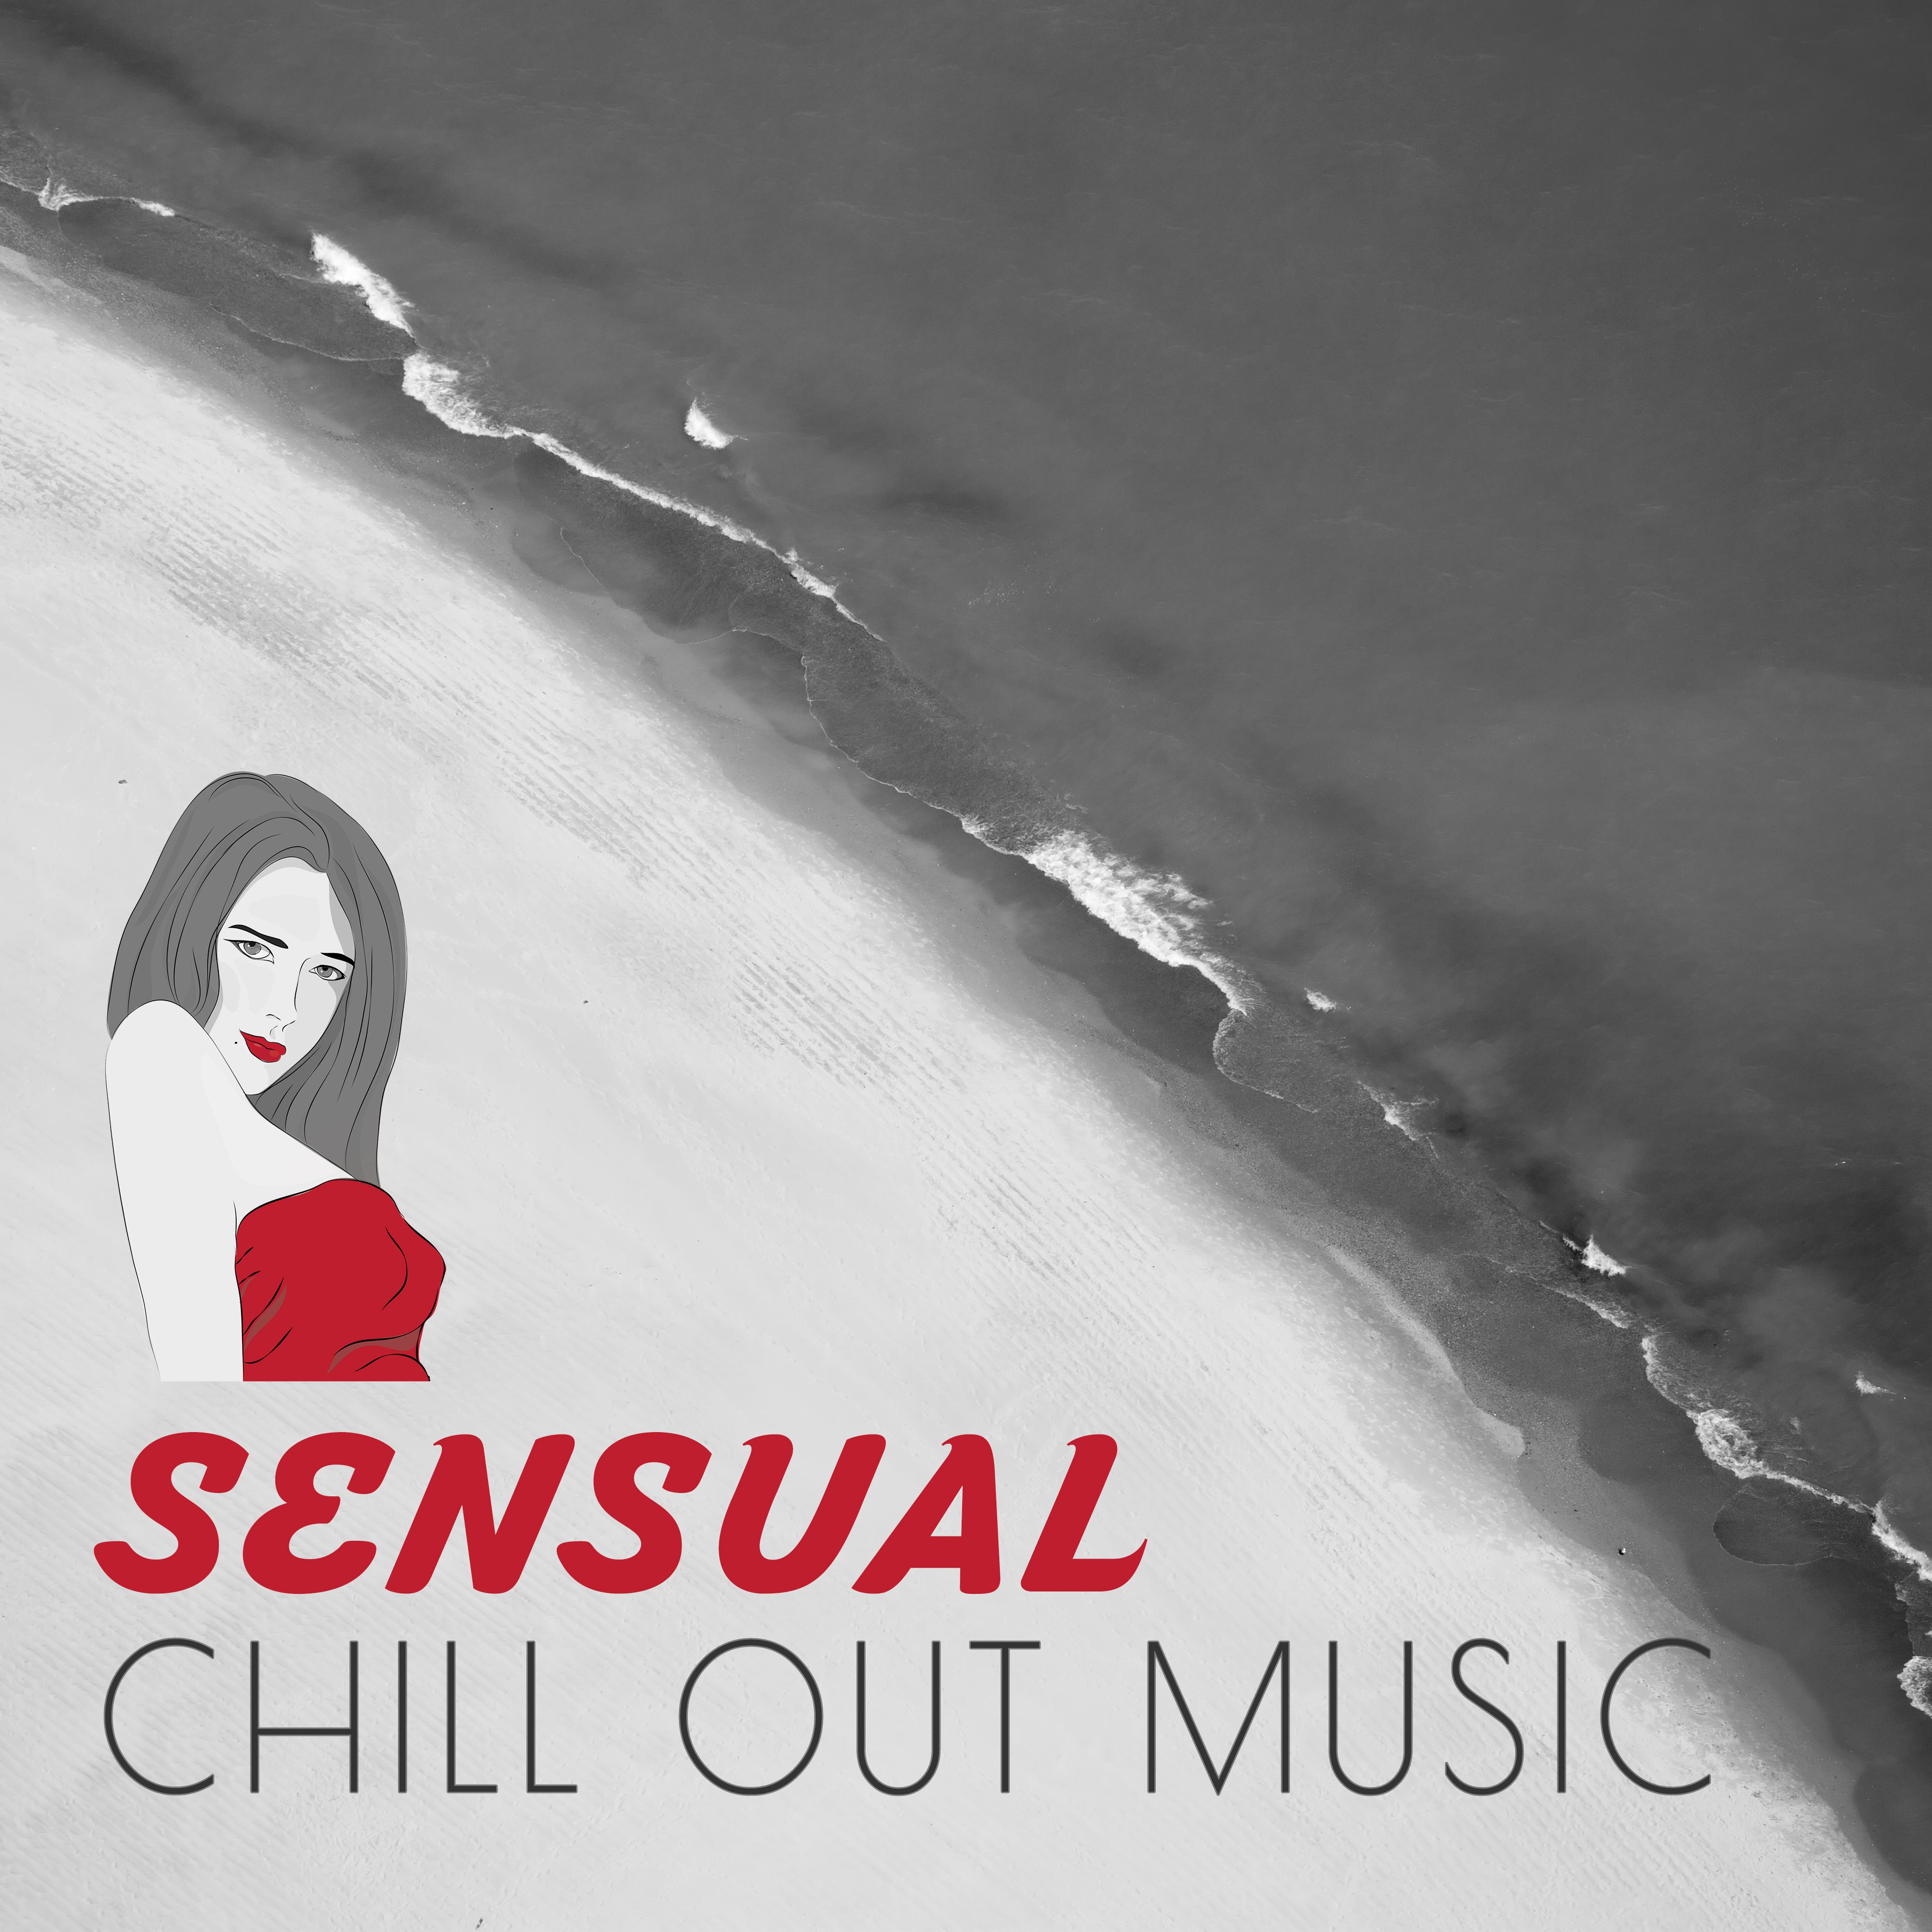 Sensual Chill Out Music – Best Chillout Music, Sweet Chill, Sensual Dance Moves